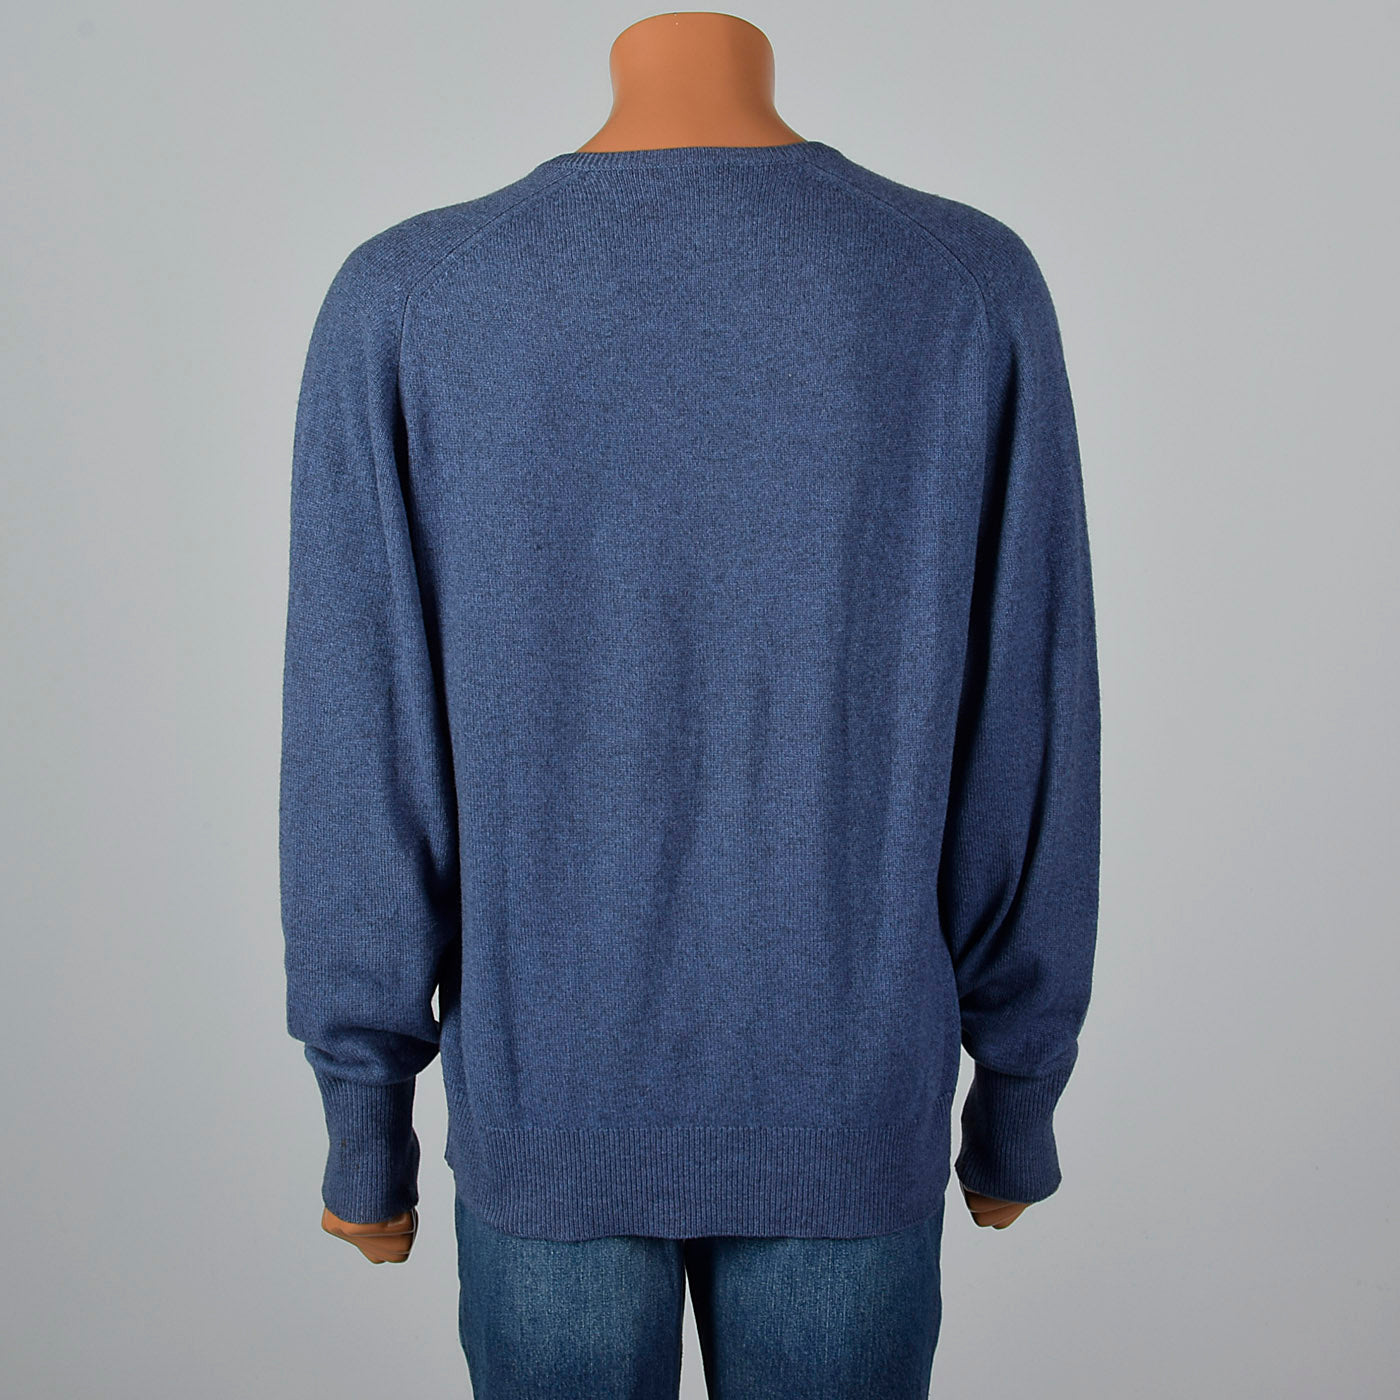 1970s Mens Blue Cashmere Sweater with V Neck